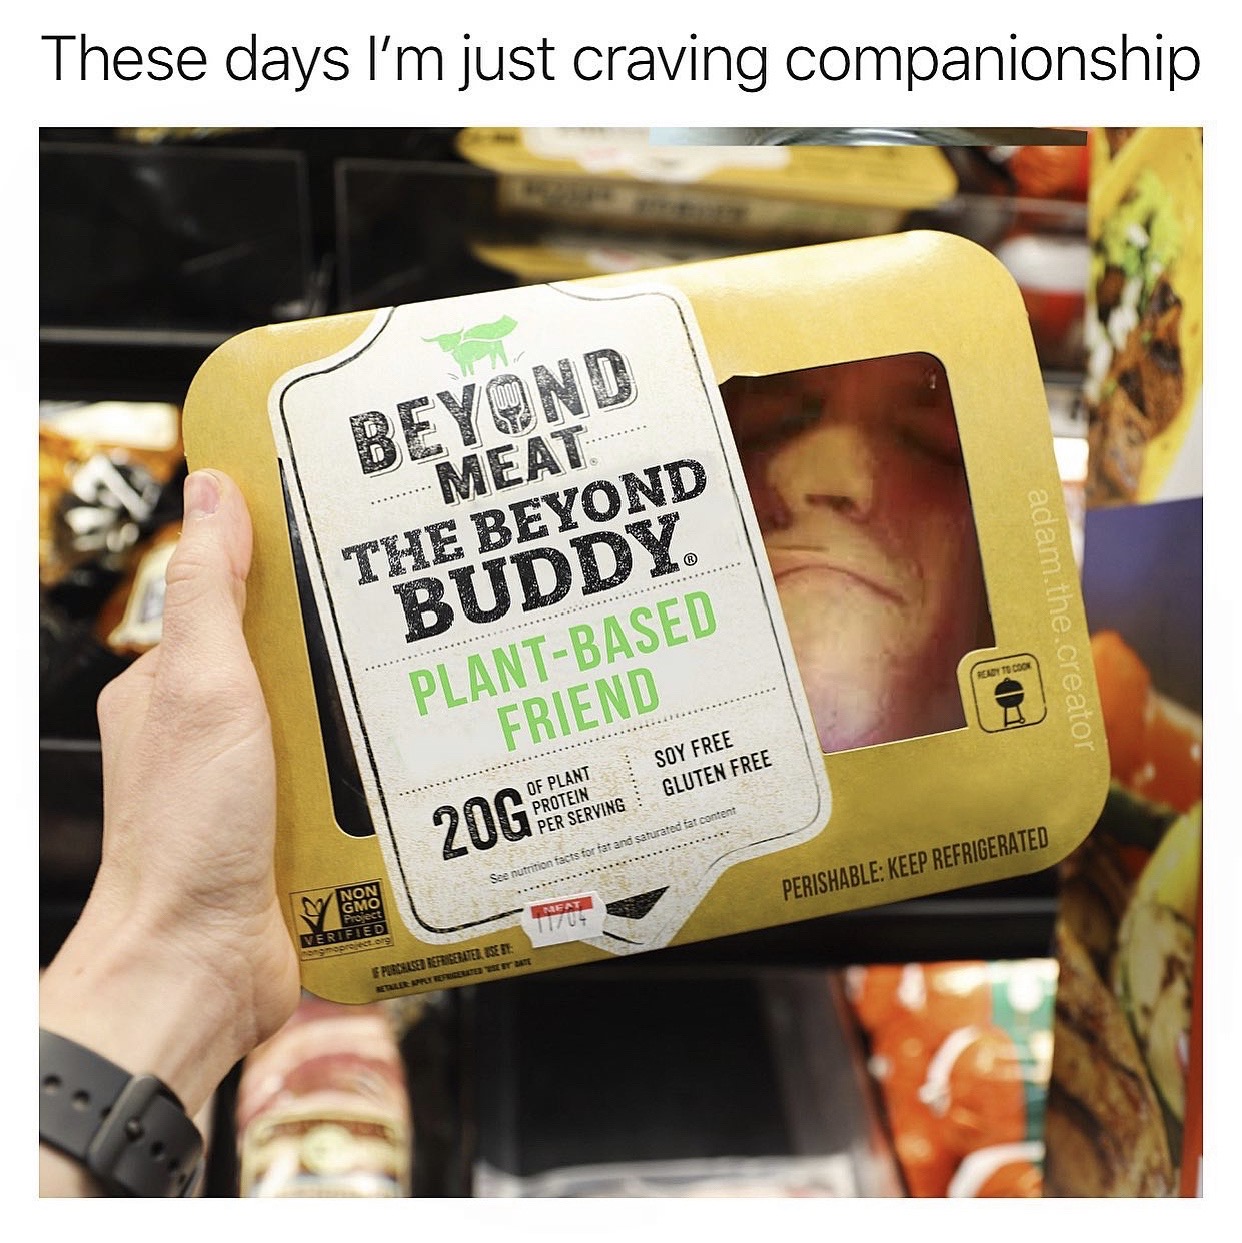 label - These days I'm just craving companionship Beyond Meat The Beyond Buddy PlantBased Friend adam.the.creator Soy Free Gluten Free Of Plant Protein Per Serving See nutrition facts for fat and saturated fat content Perishable Keep Refrigerated Neat Non